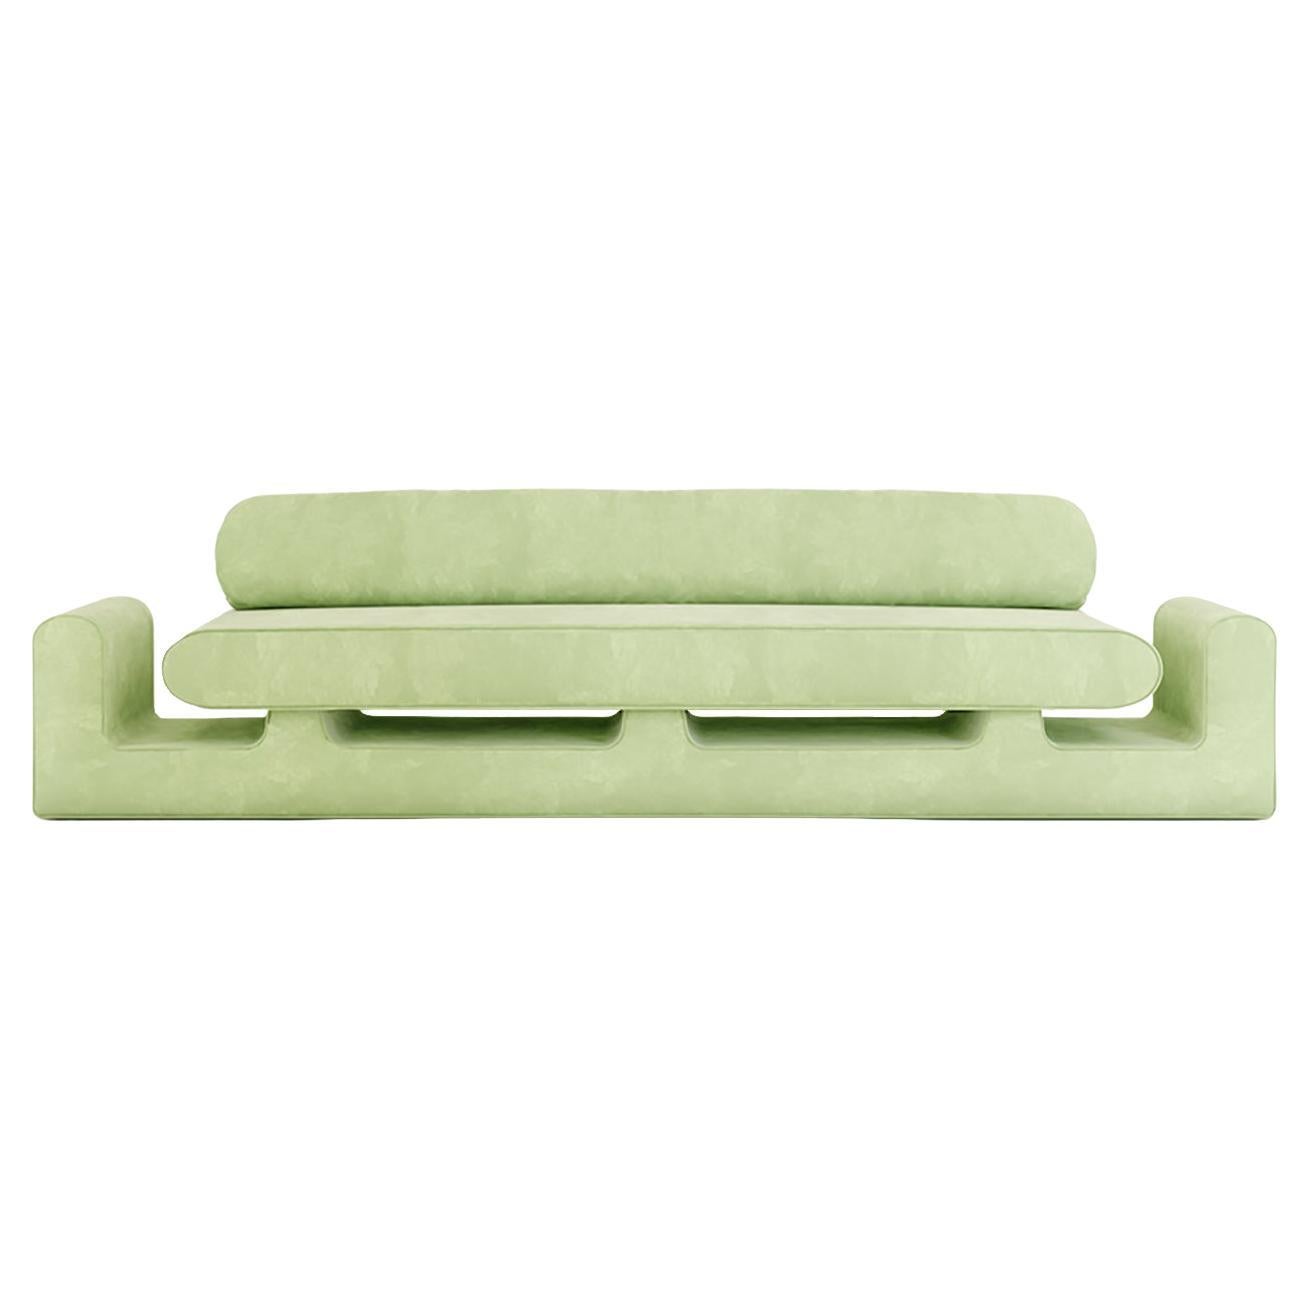 Hug Sofa Upholstered, Chubby Arms by Rejo Studio For Sale